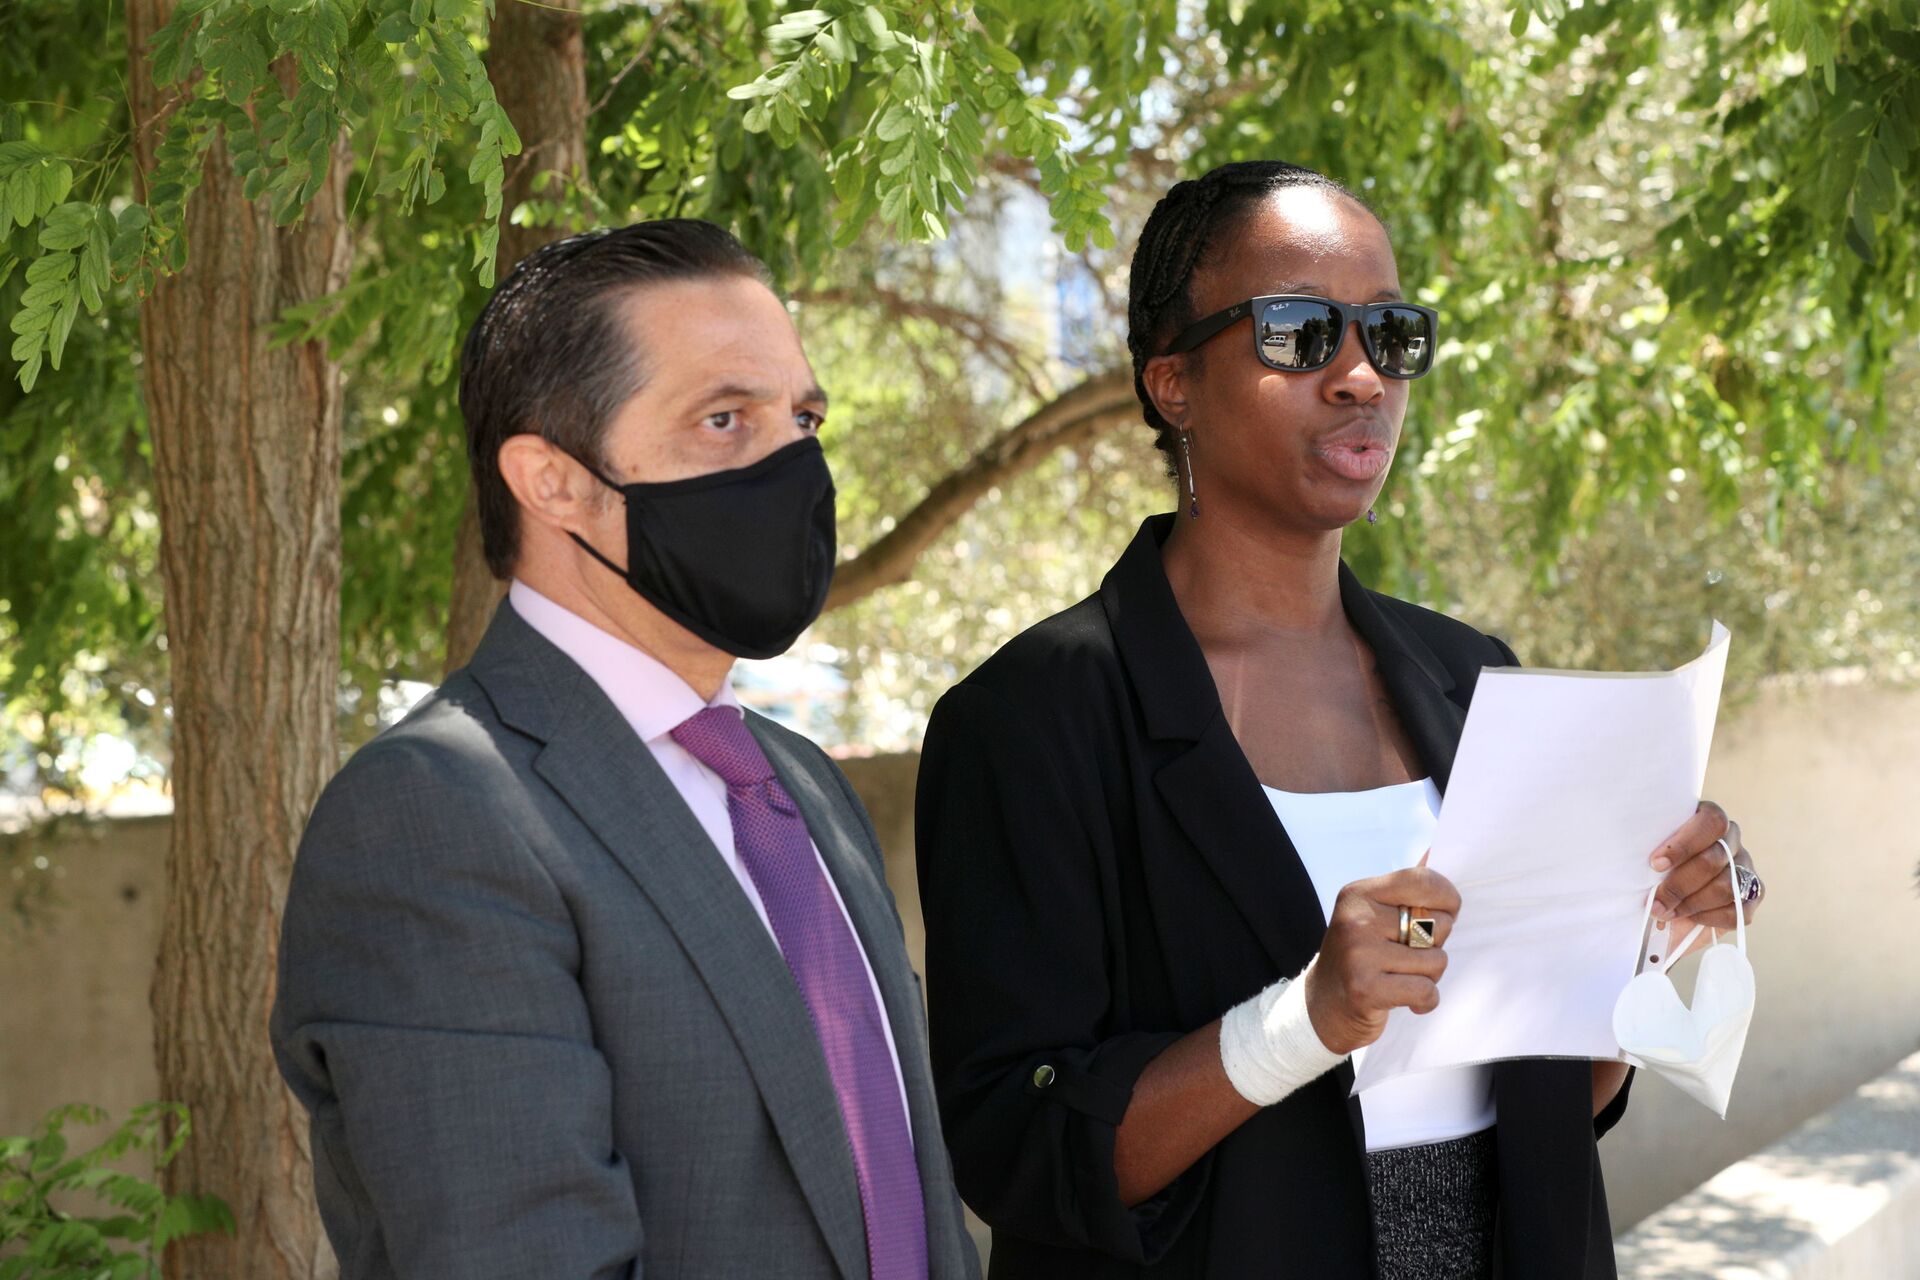 Janice McAfee, a wife of John McAfee, flanked by her lawyer Javier Villalba, speaks to media as she leaves the Brians 2 prison where her husband was found dead in his prison cell after the Spanish high court had authorised his extradition to the U.S., in Sant Esteve Sesrovires, Spain June 25, 2021. - Sputnik International, 1920, 07.09.2021